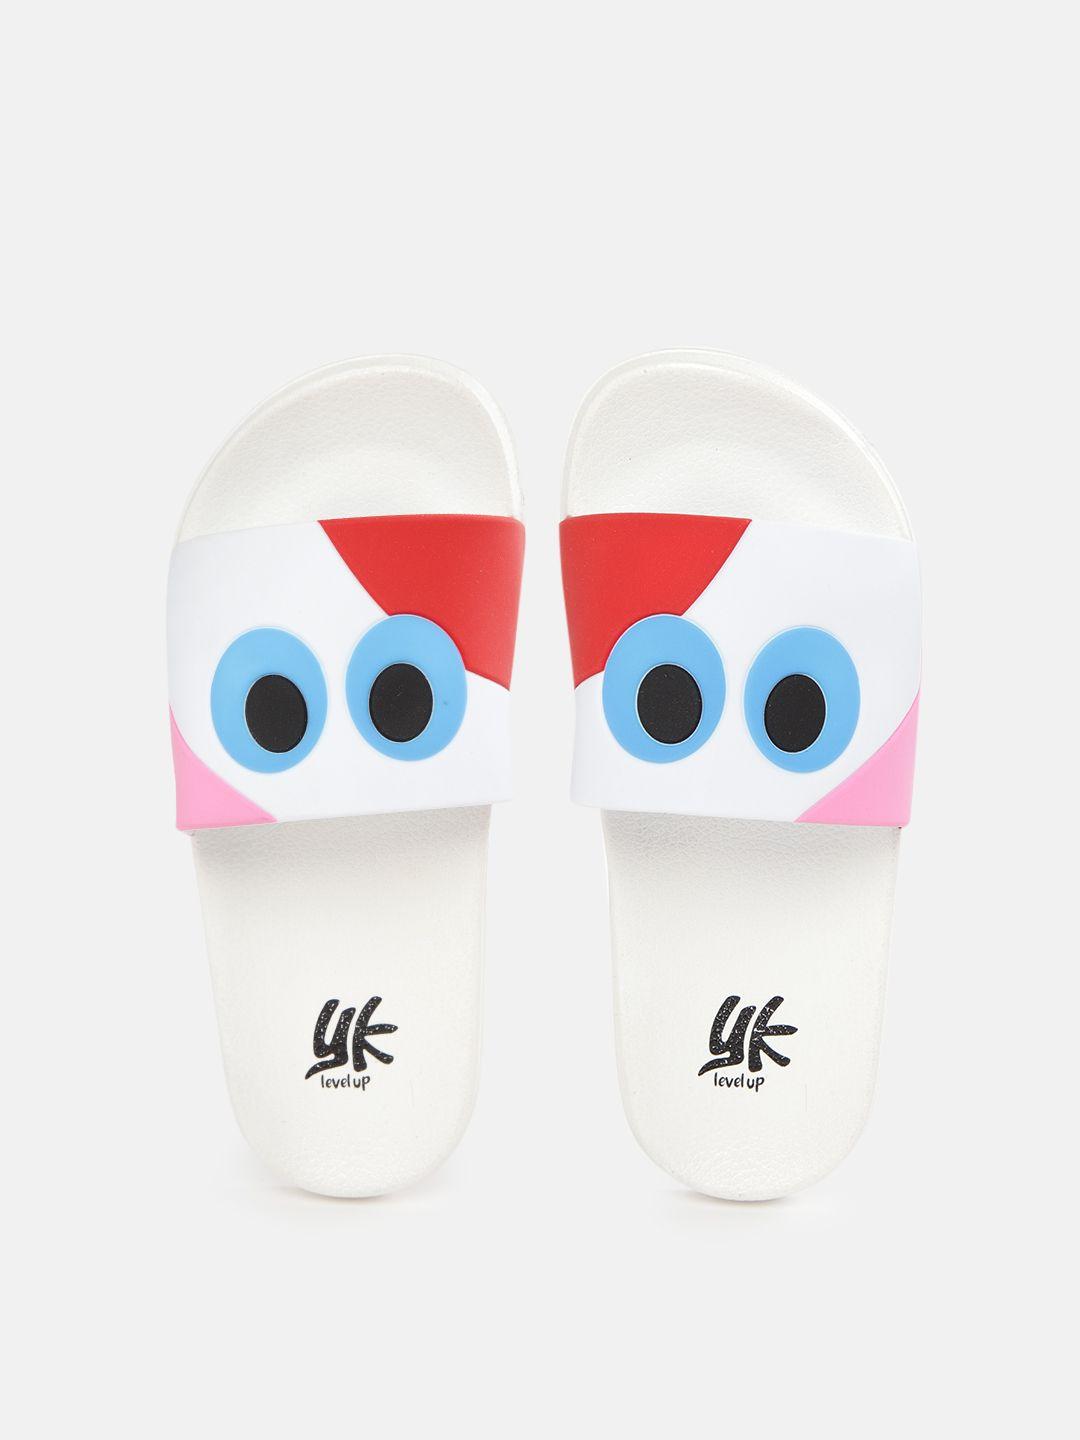 yk-boys-white-&-blue-quirky-printed-sliders